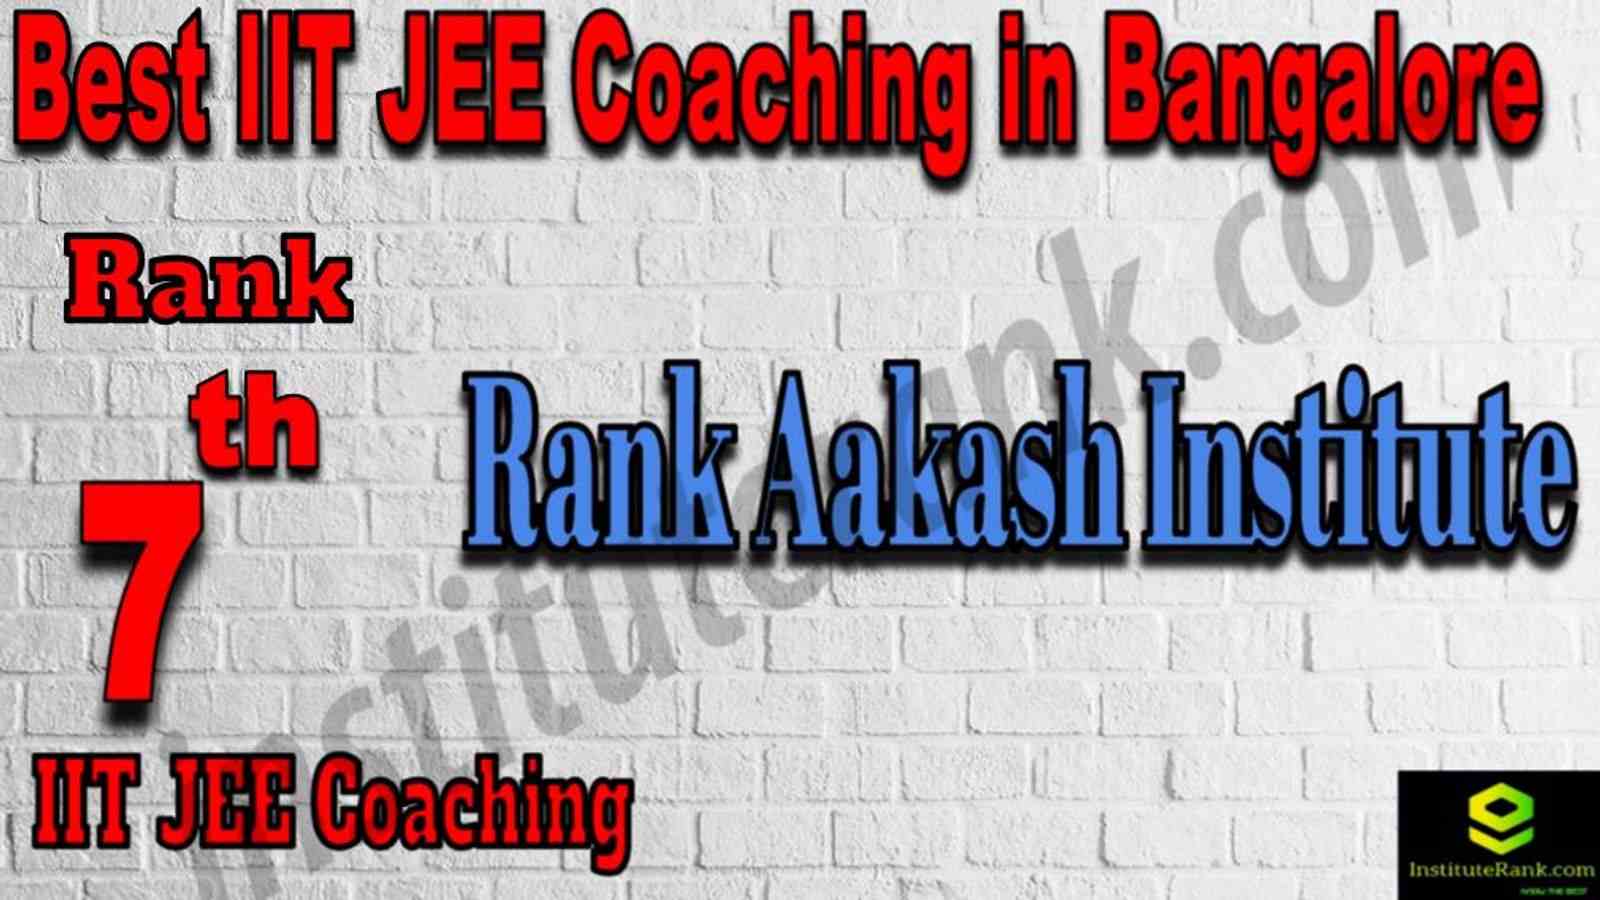 7th Best IIT JEE Coaching in Bangalore